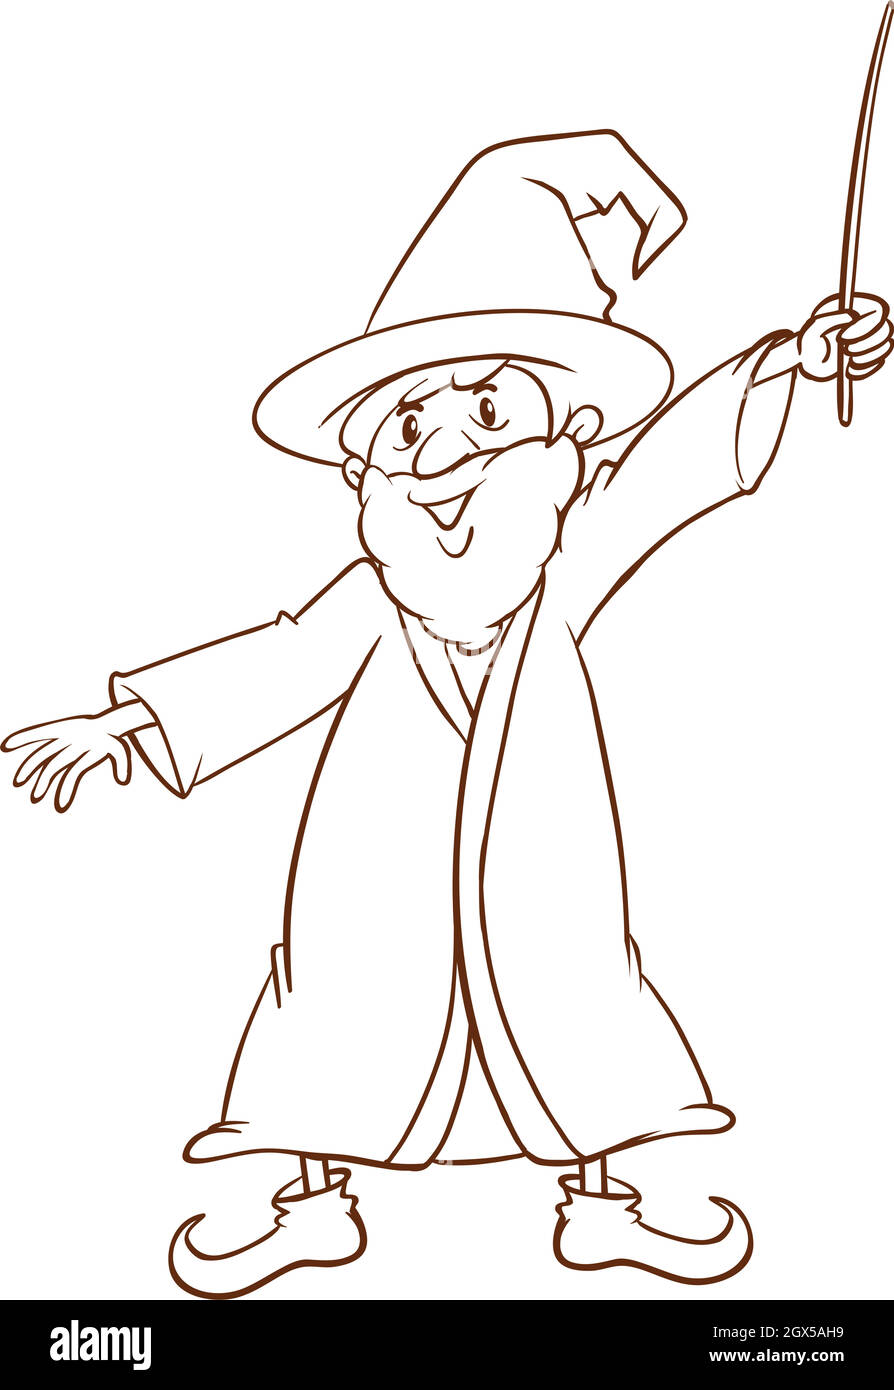 A simple drawing of a wizard Stock Vector